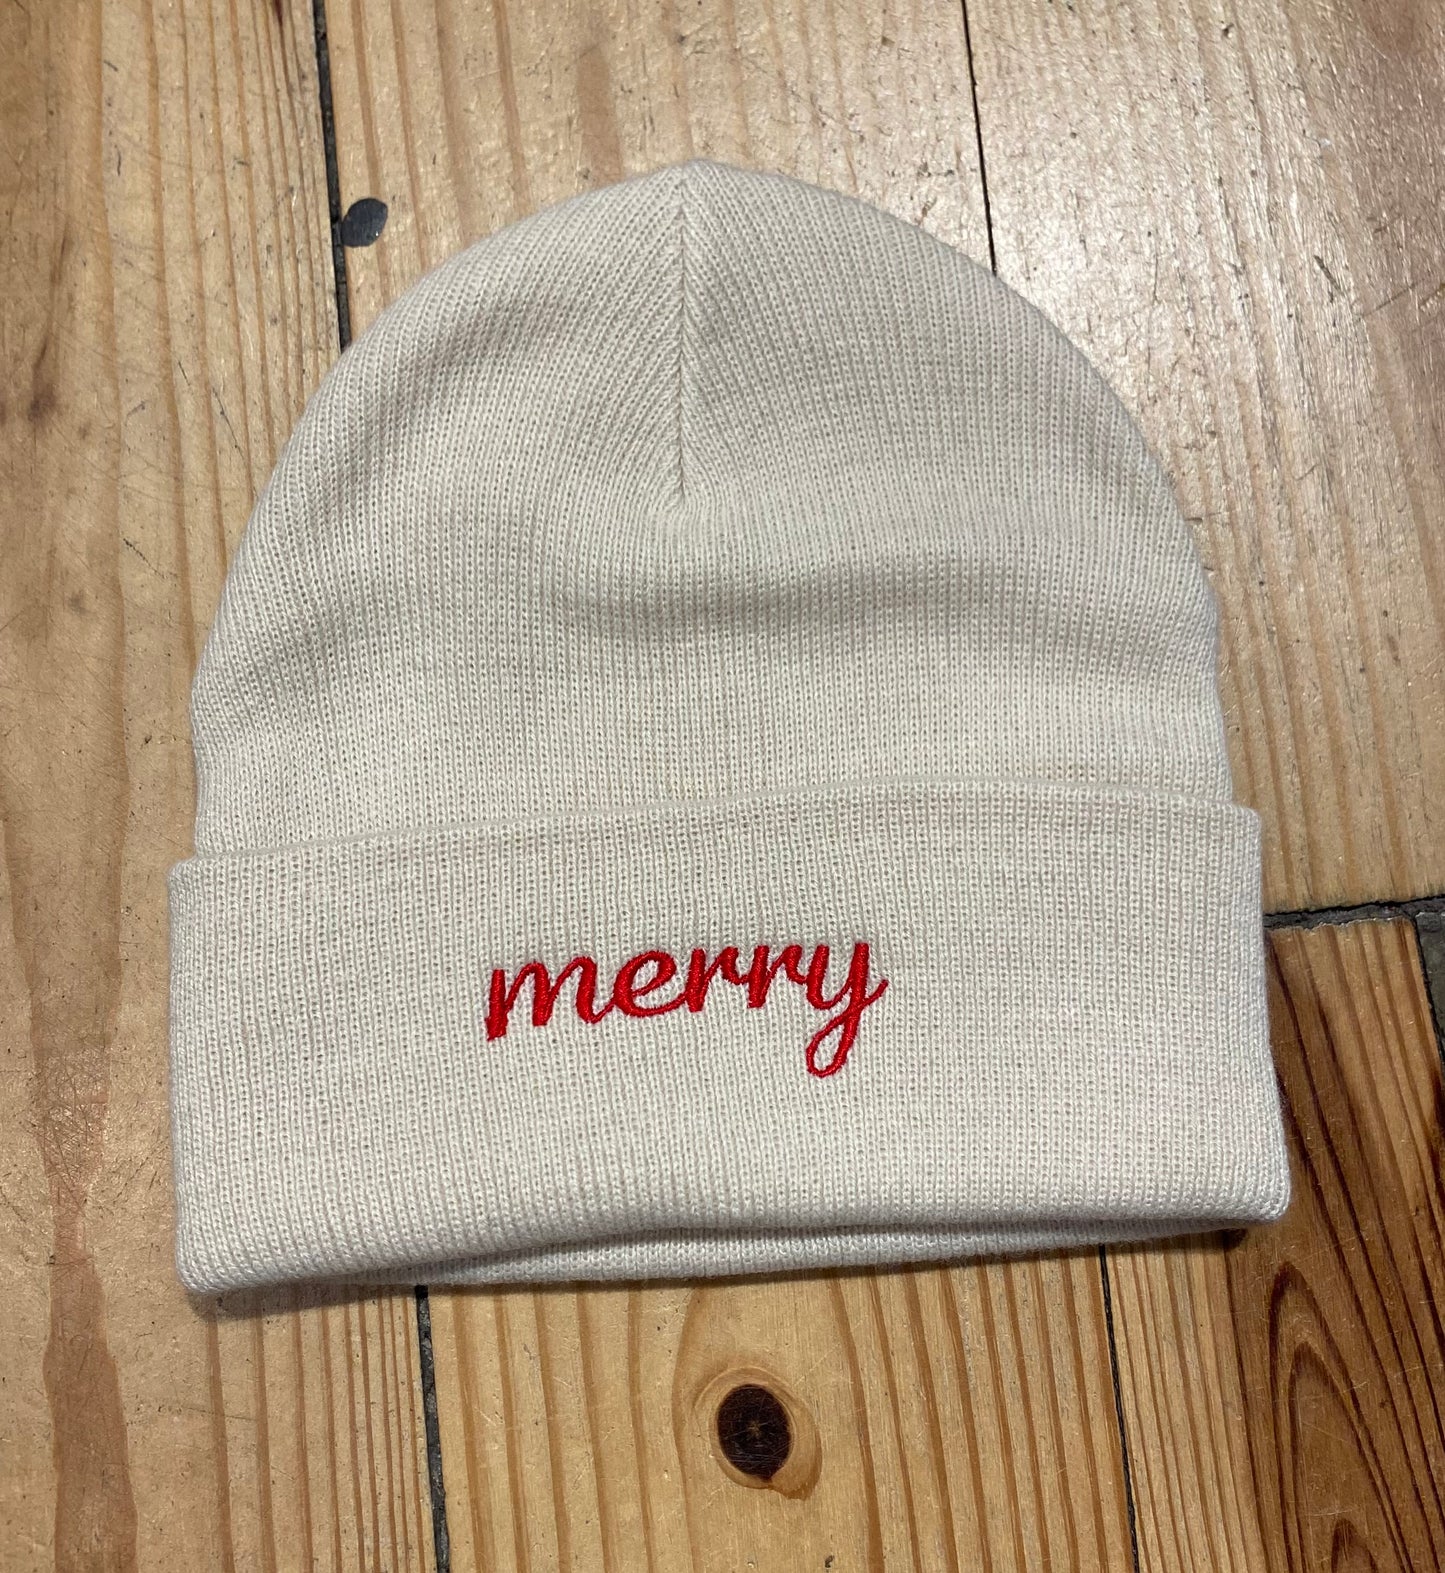 Merry Embroidered Beige Knit Beanie